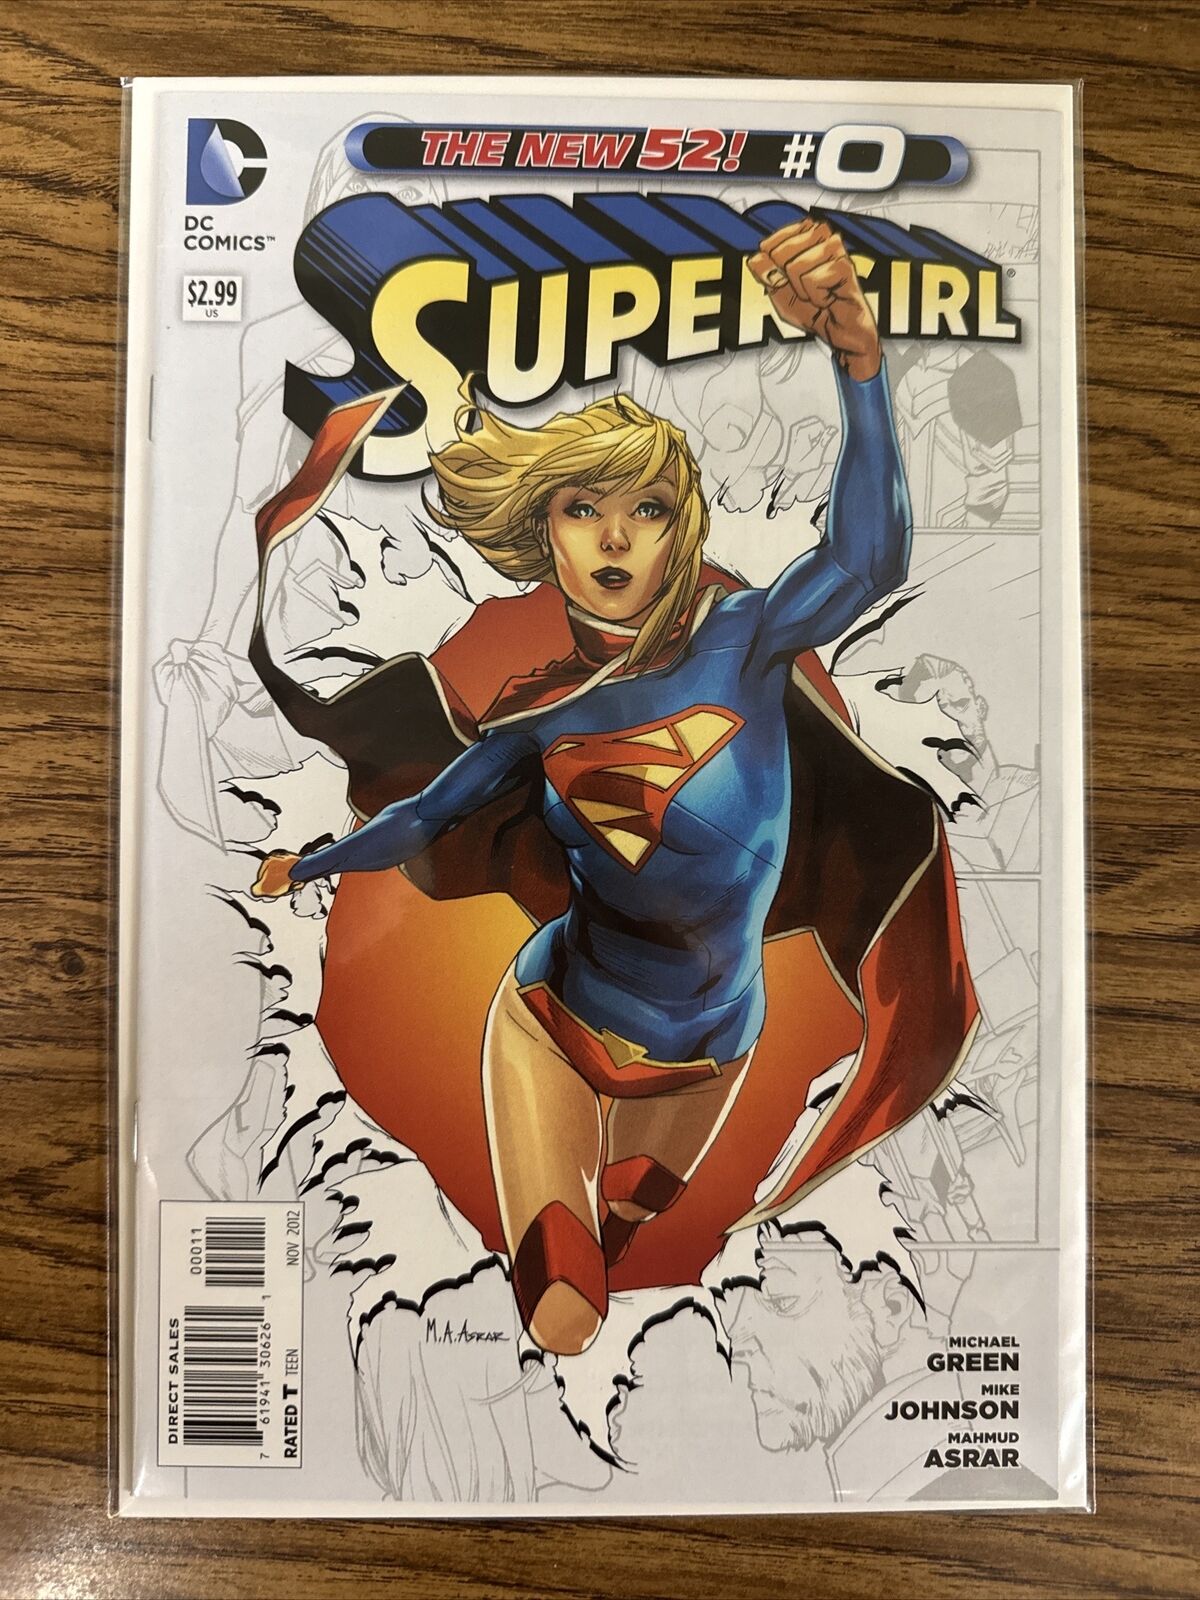 SUPERGIRL #0 The New 52 DC Comic Book. Higher Grade. Nice Clean Copy